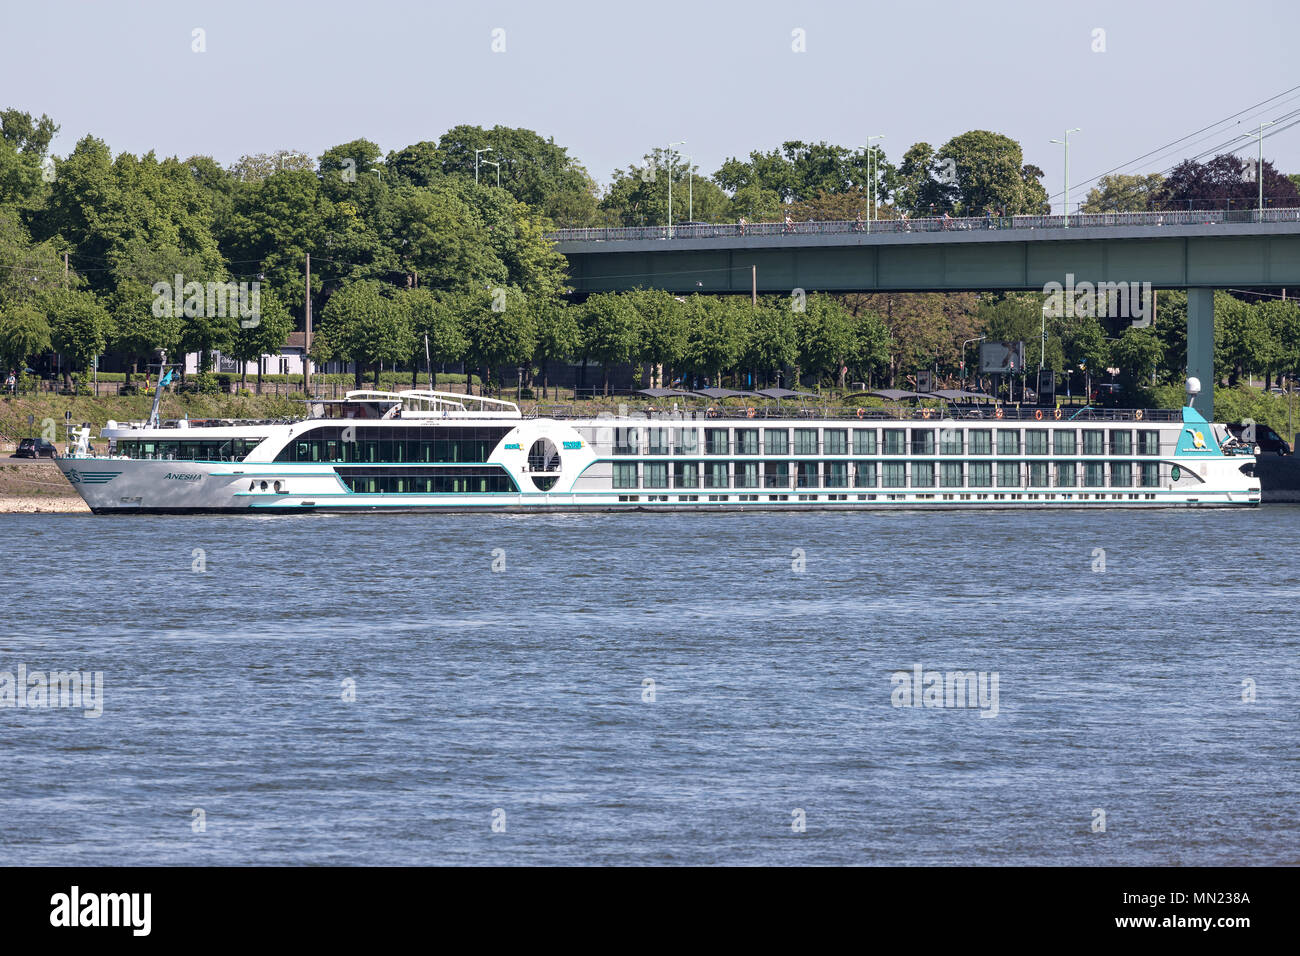 Rver cruise ship ANESHA of Phoenix Reisen in Cologne, Germany. ANESHA has a capacity of 180 passengers and is 135 m long. Stock Photo